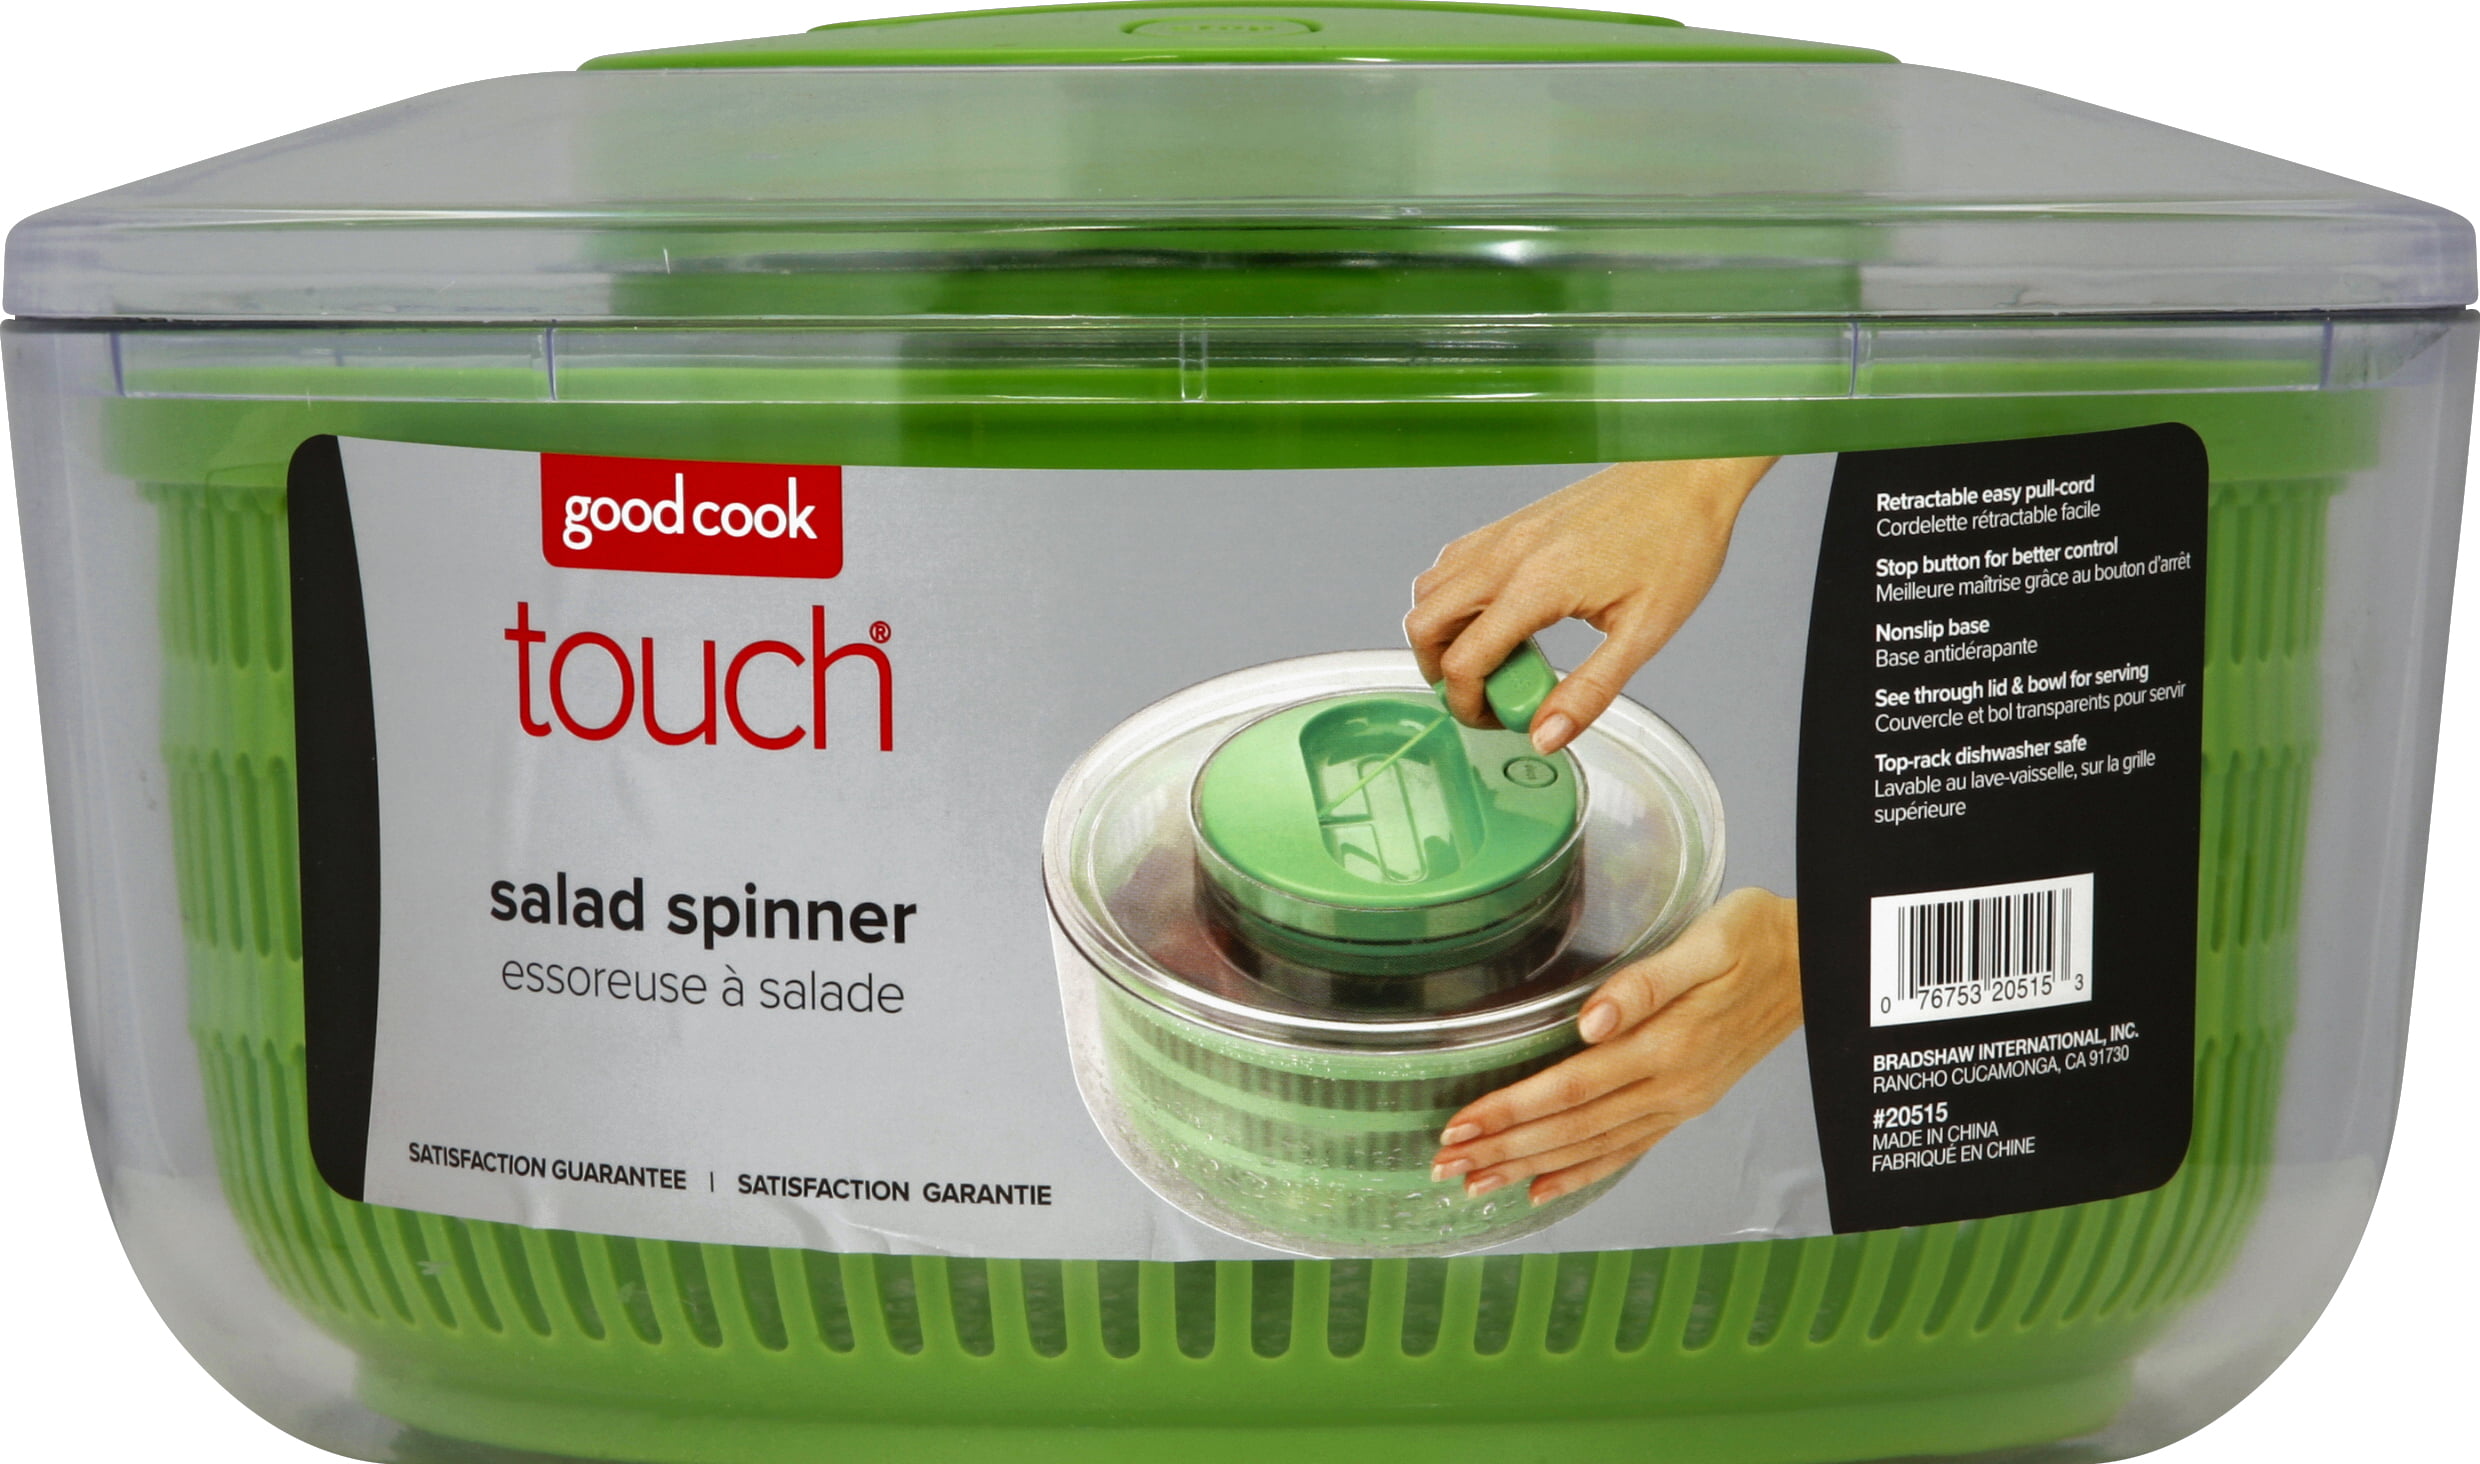 Goodcook Touch Salad Spinner